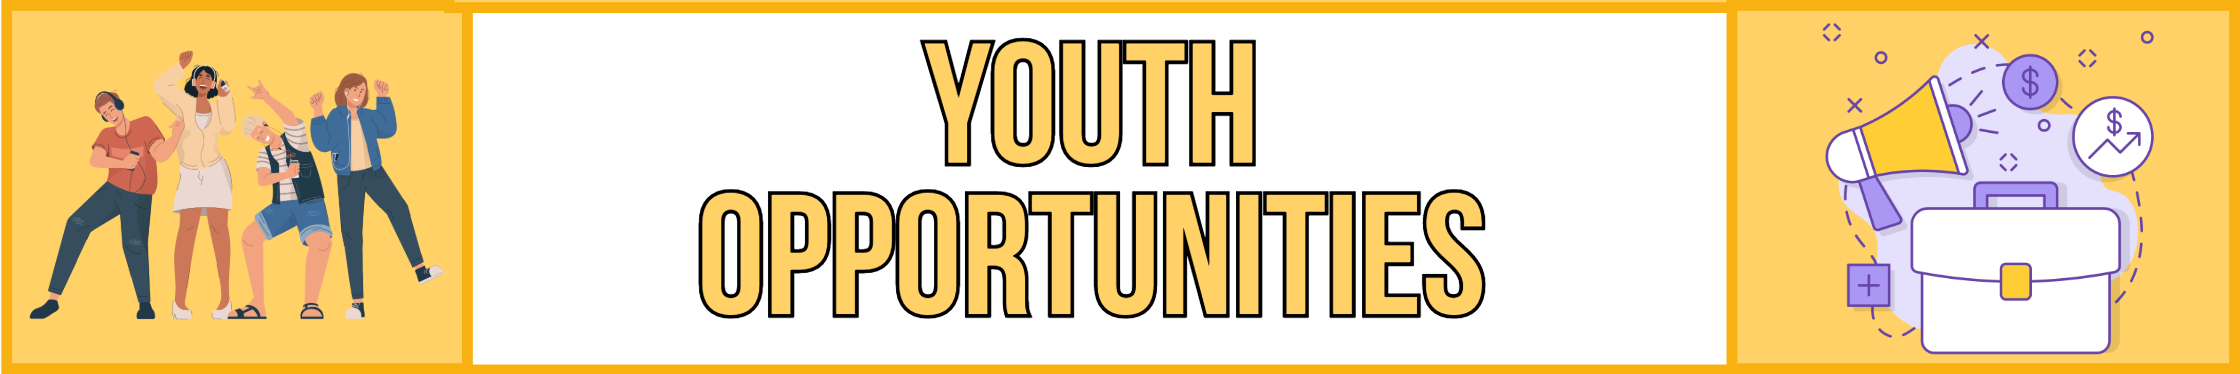 Banner for Youth Opportunities page